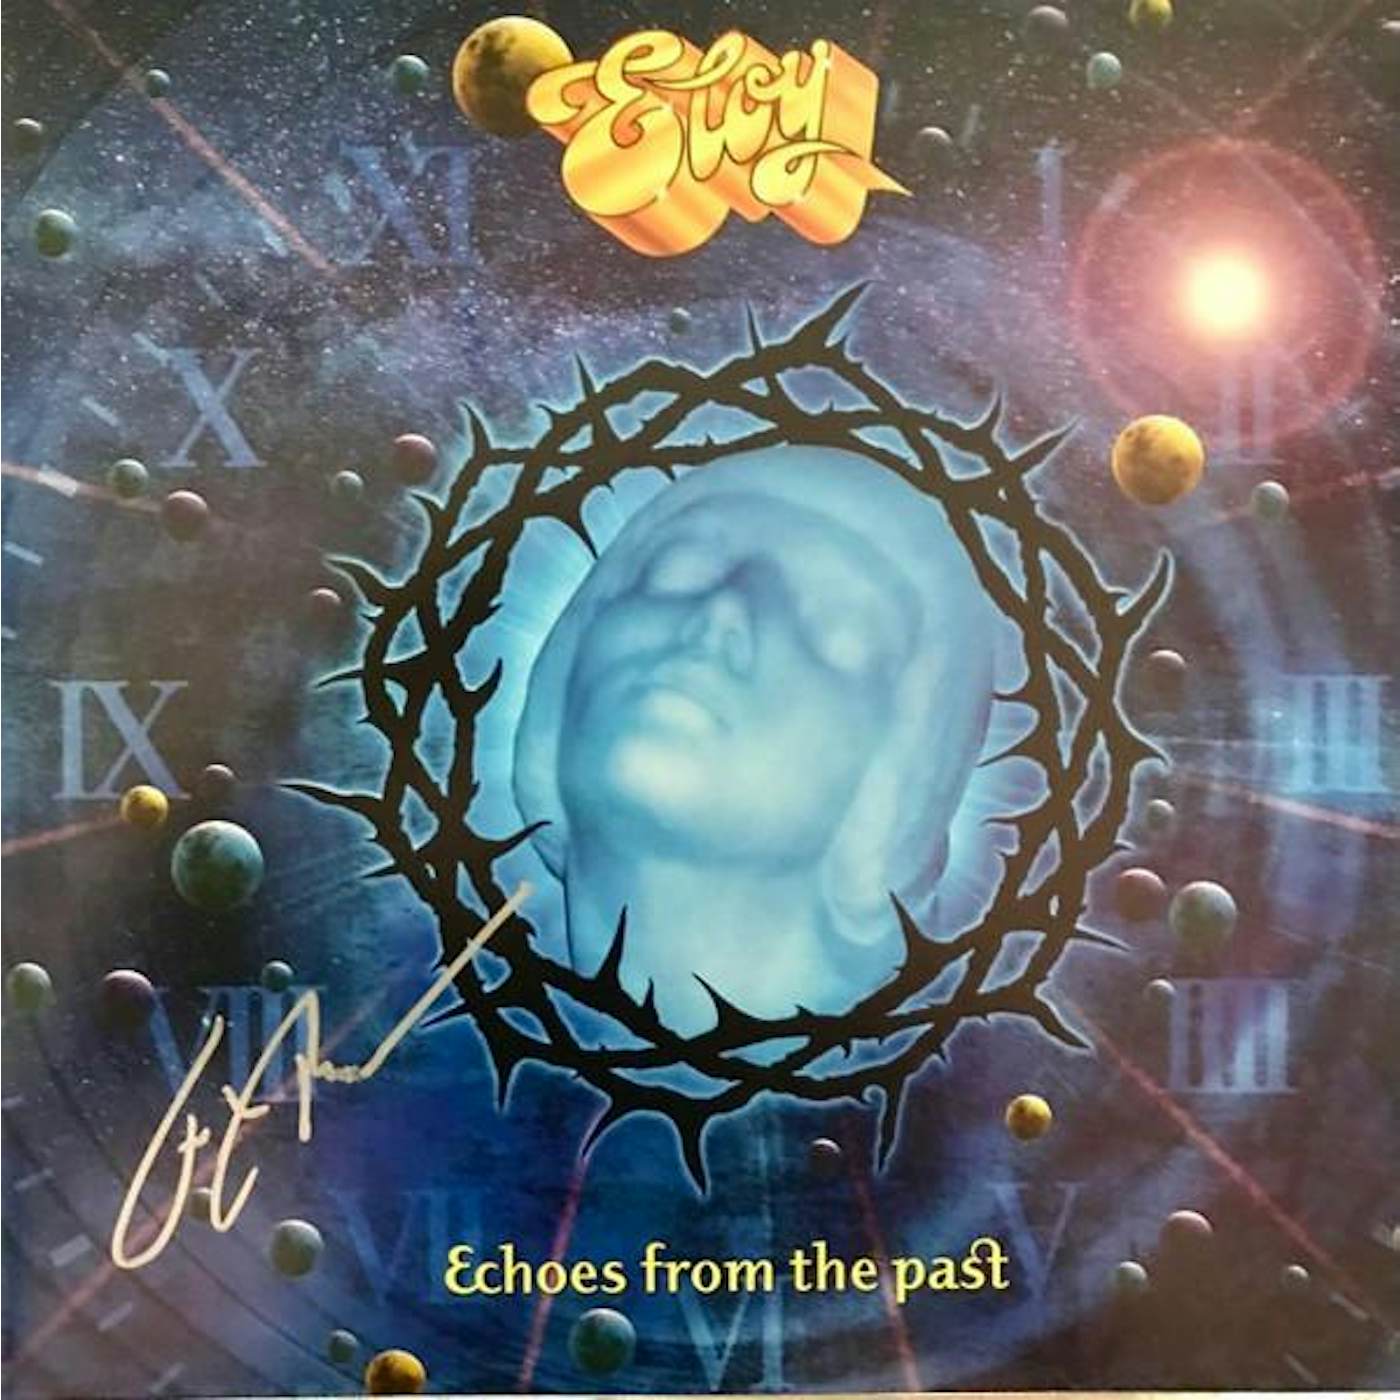 Eloy ECHOES FROM THE PAST Vinyl Record